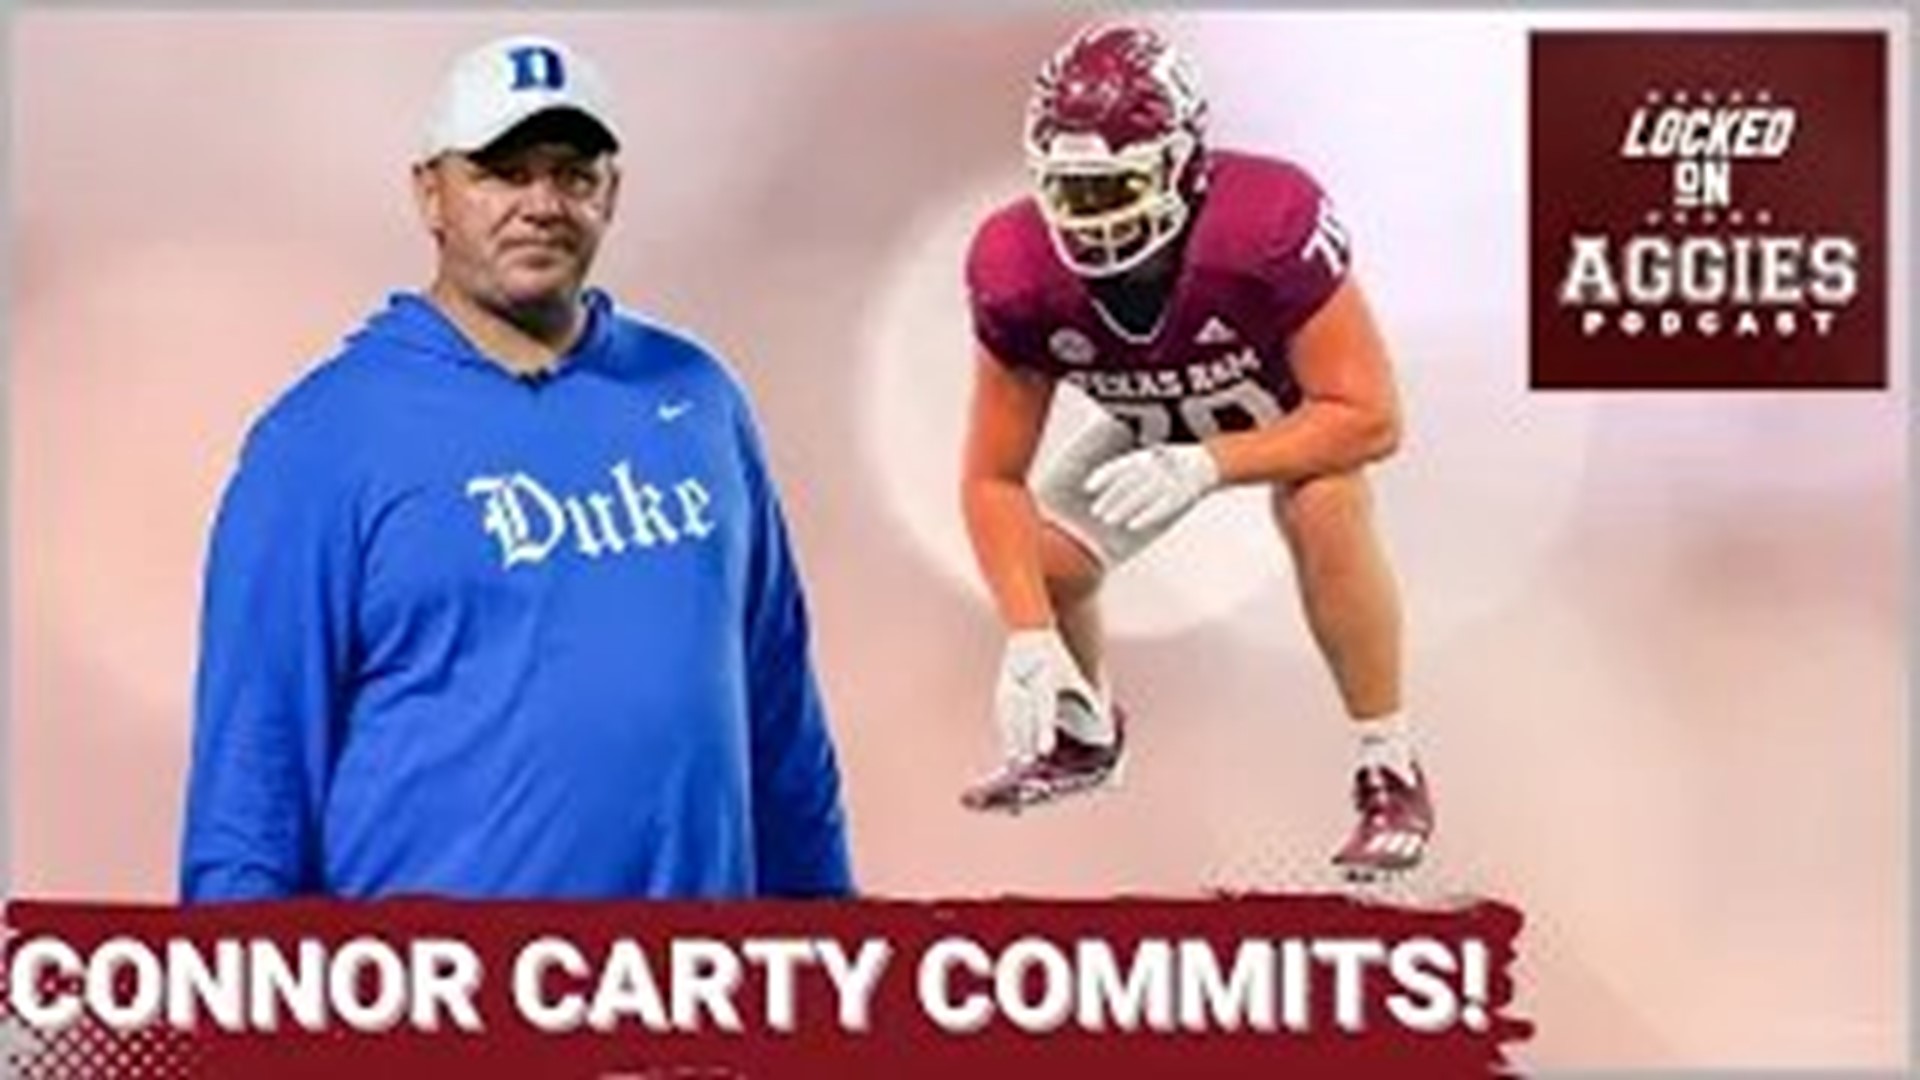 On today's episode of Locked On Aggies, host Andrew Stefaniak talks about Texas A&M landing three-star IOL Connor Carty, who will be a massive addition to the O Line